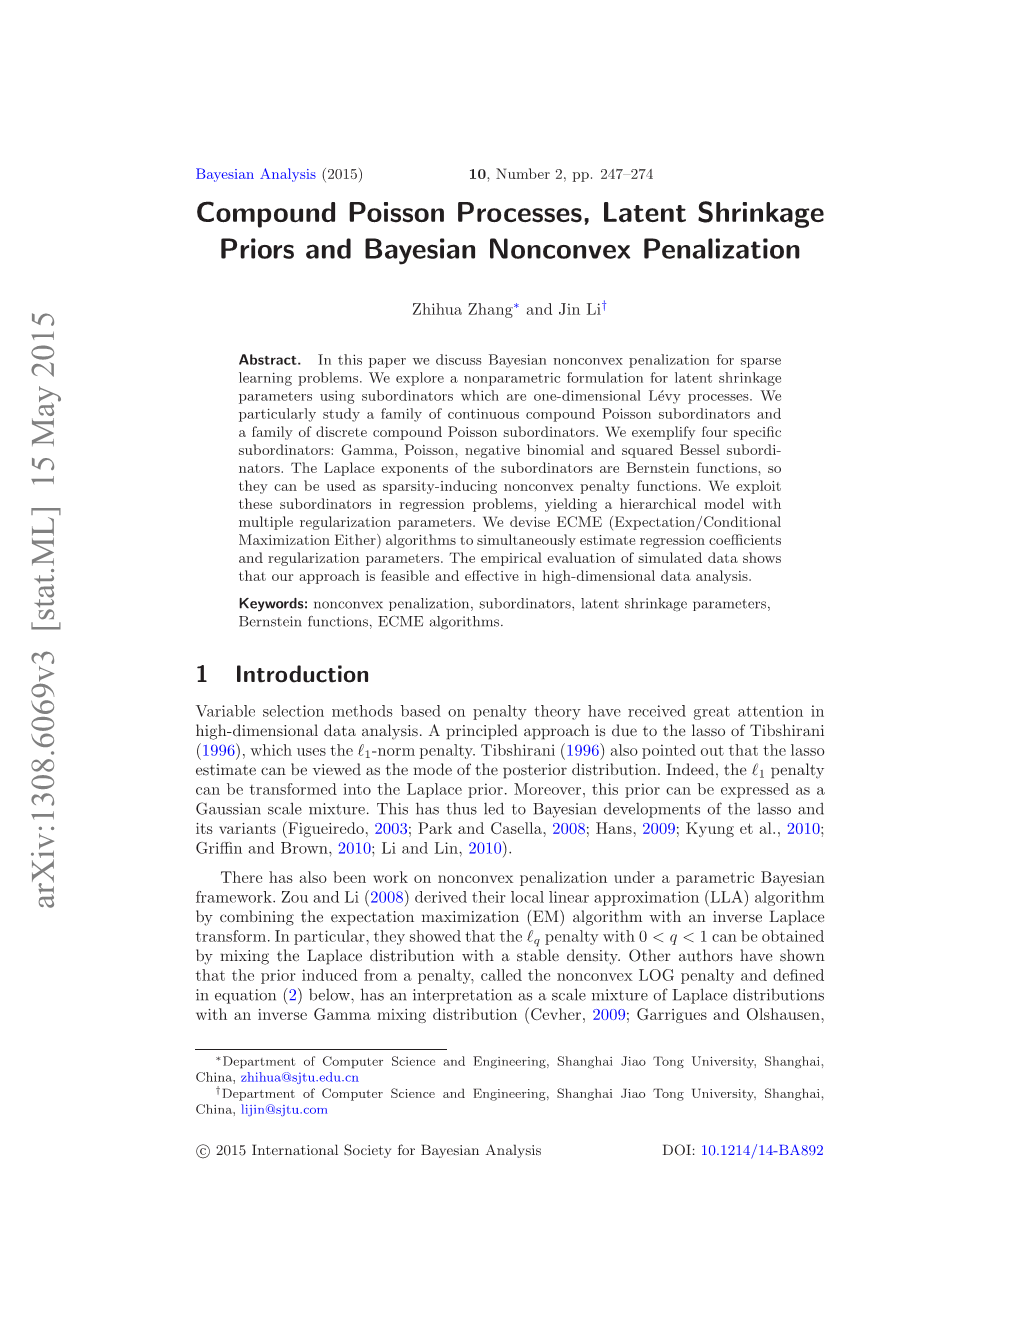 Compound Poisson Processes, Latent Shrinkage Priors and Bayesian